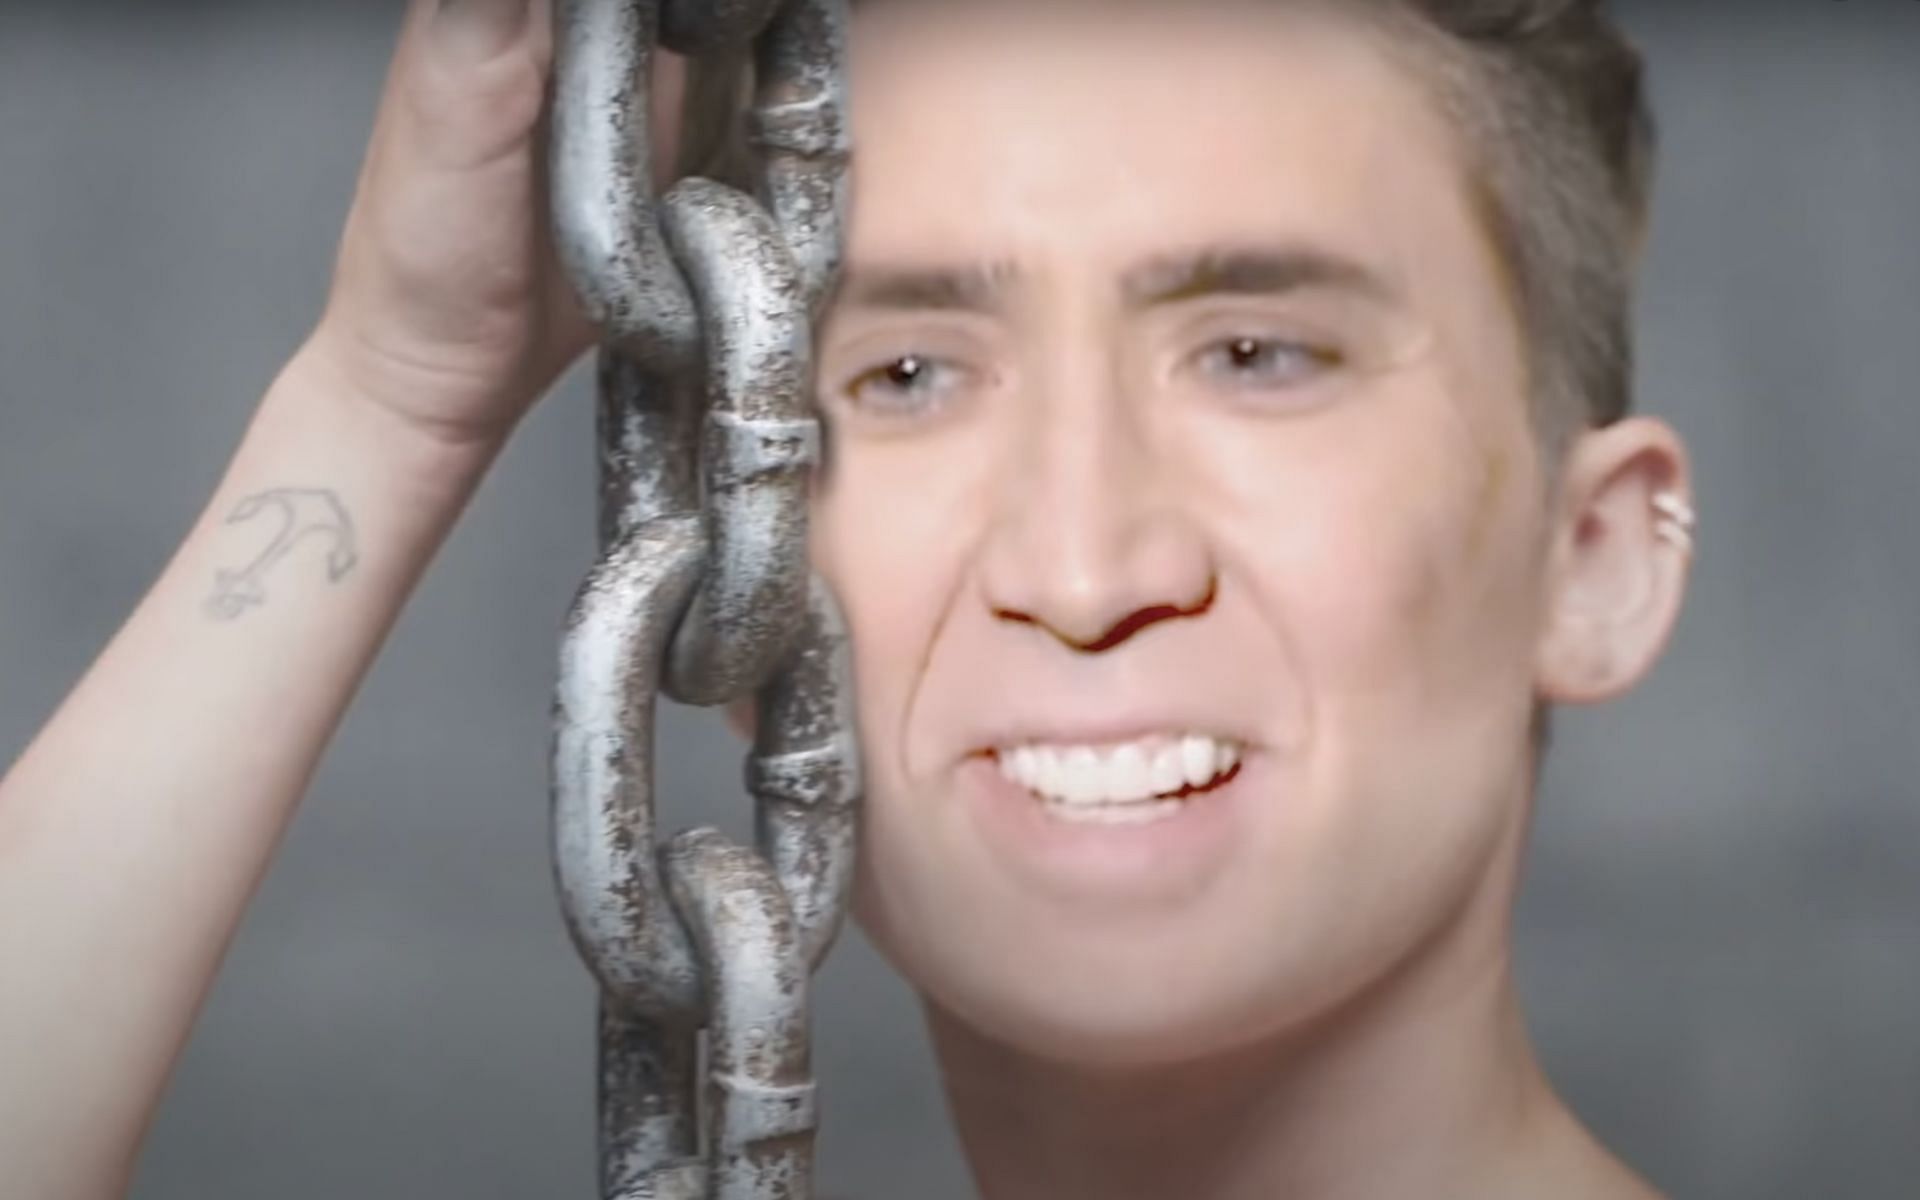 Nicolas Cage&#039;s face plastered on that of Miley Cyrus&#039; in the Wrecking Ball parody (Image via sukmywangBryanStars/YouTube)